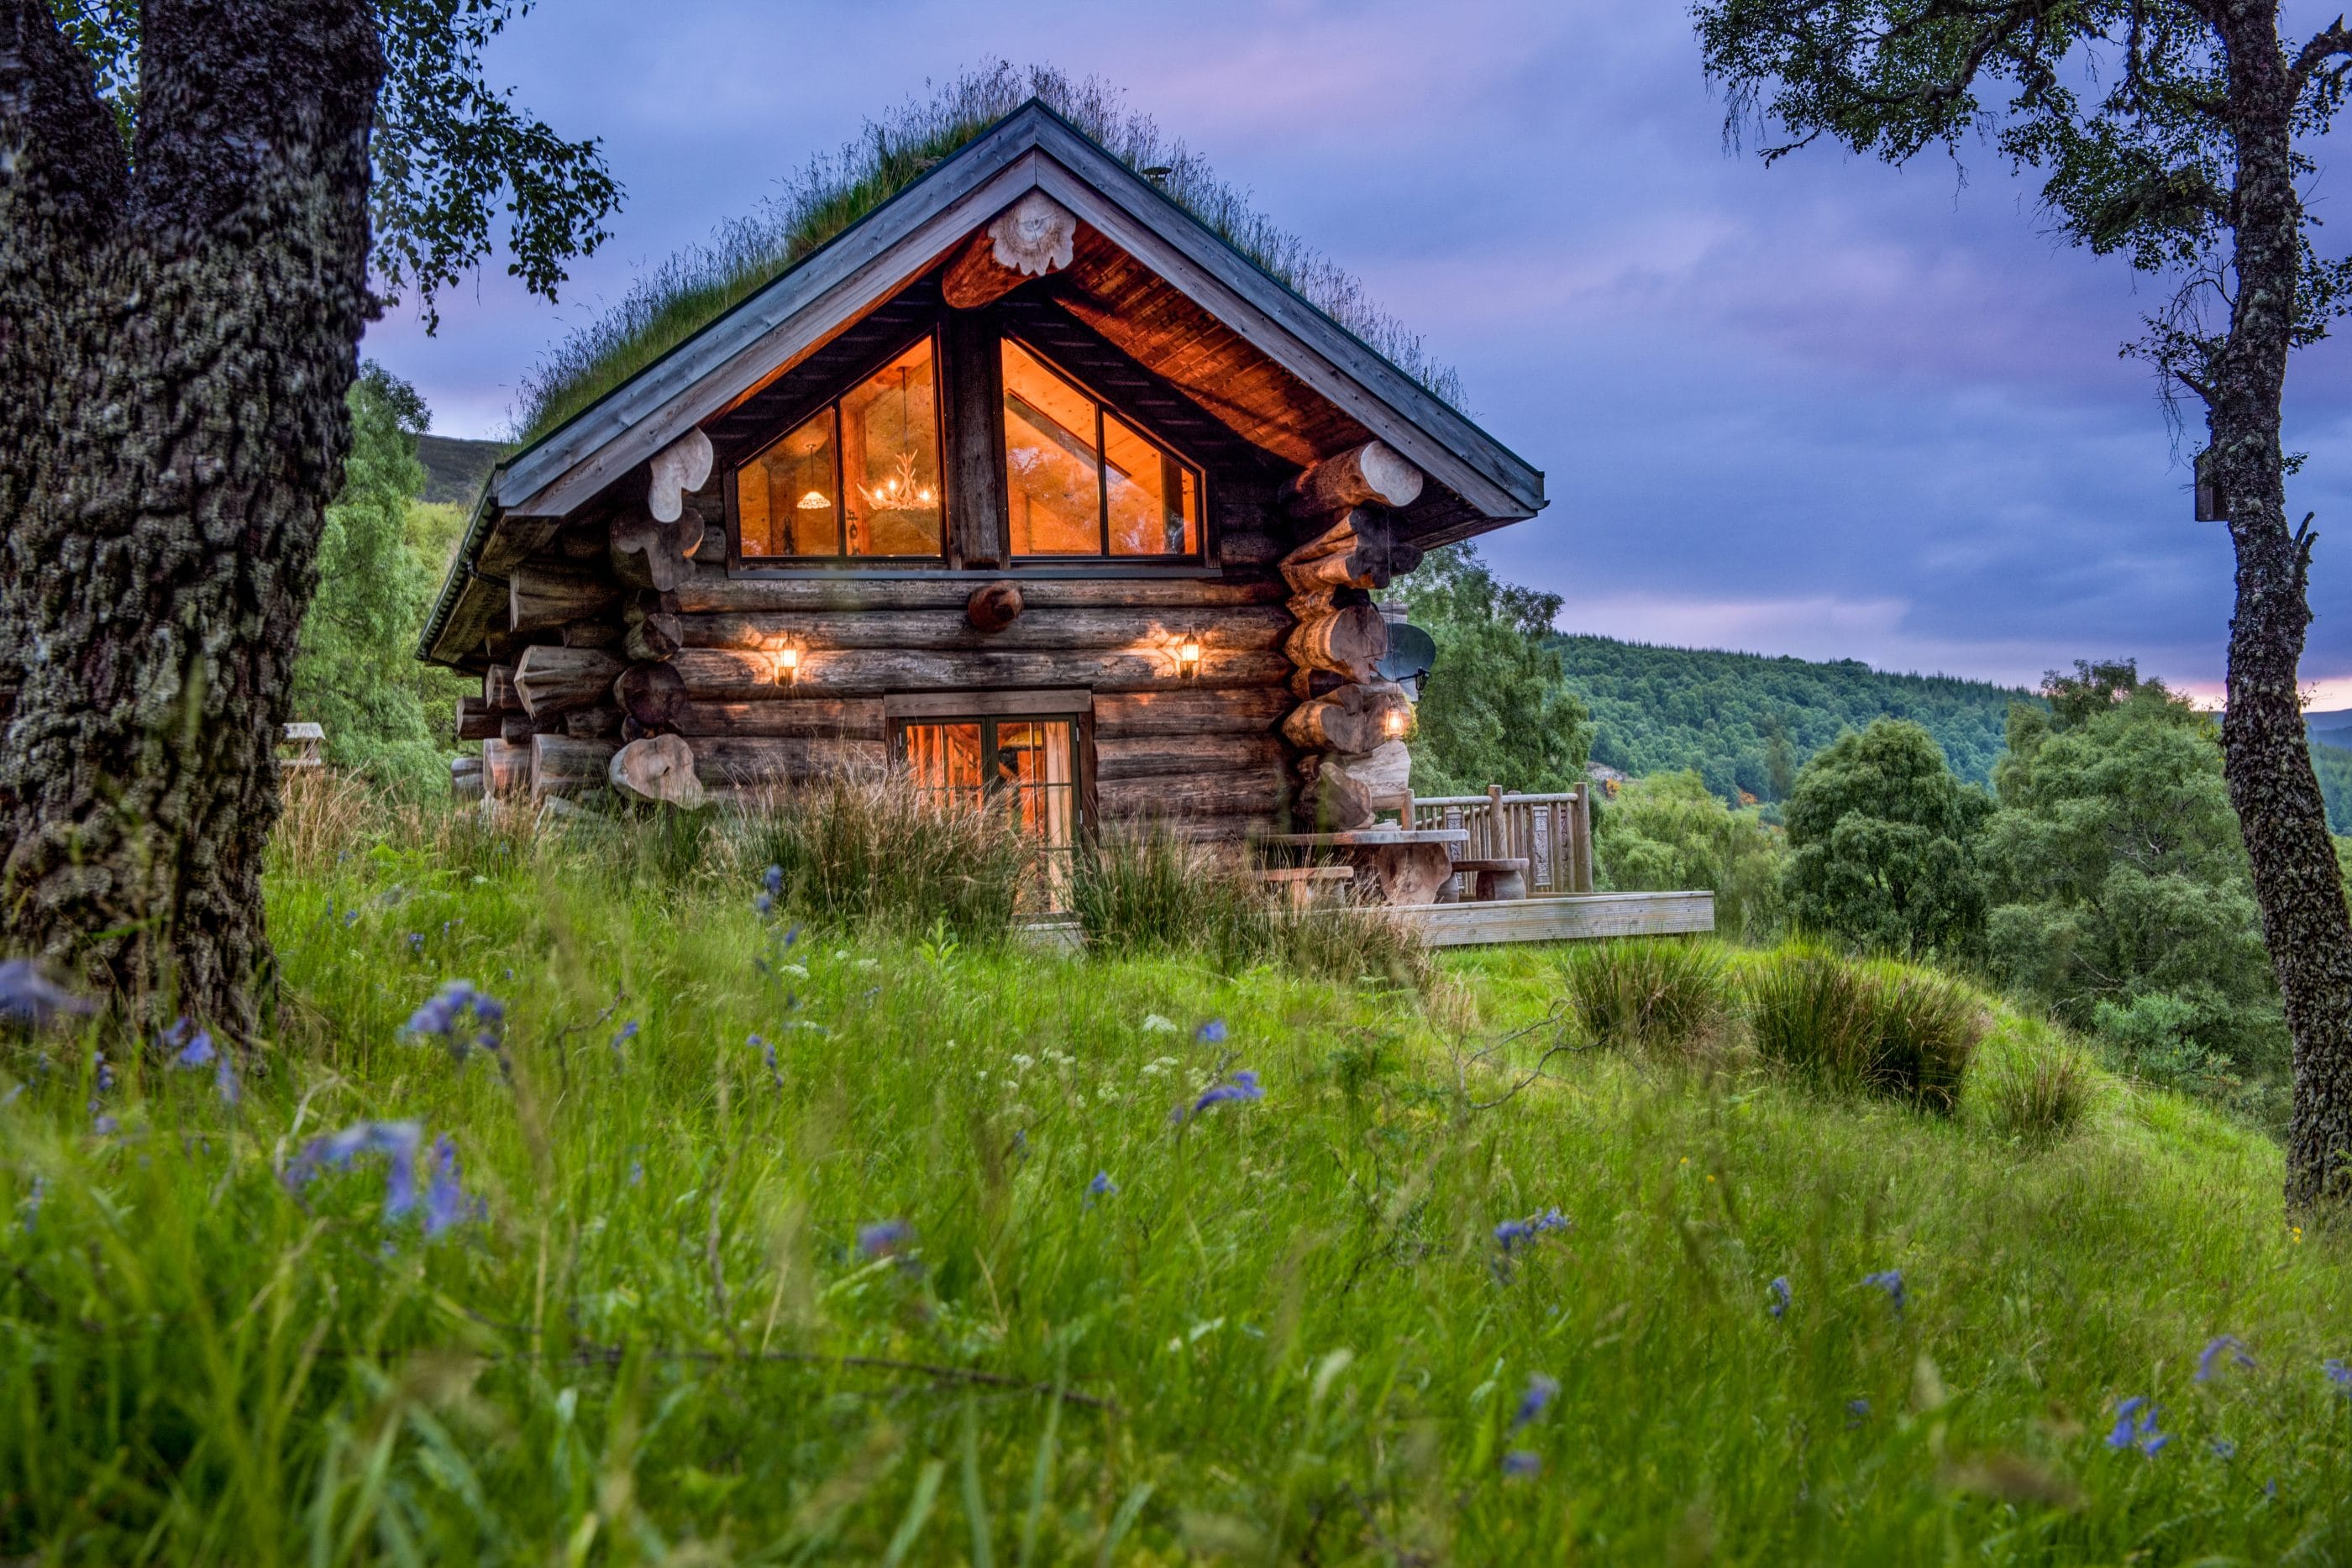 Parus log cabin nestled in the grass at Eagle brae